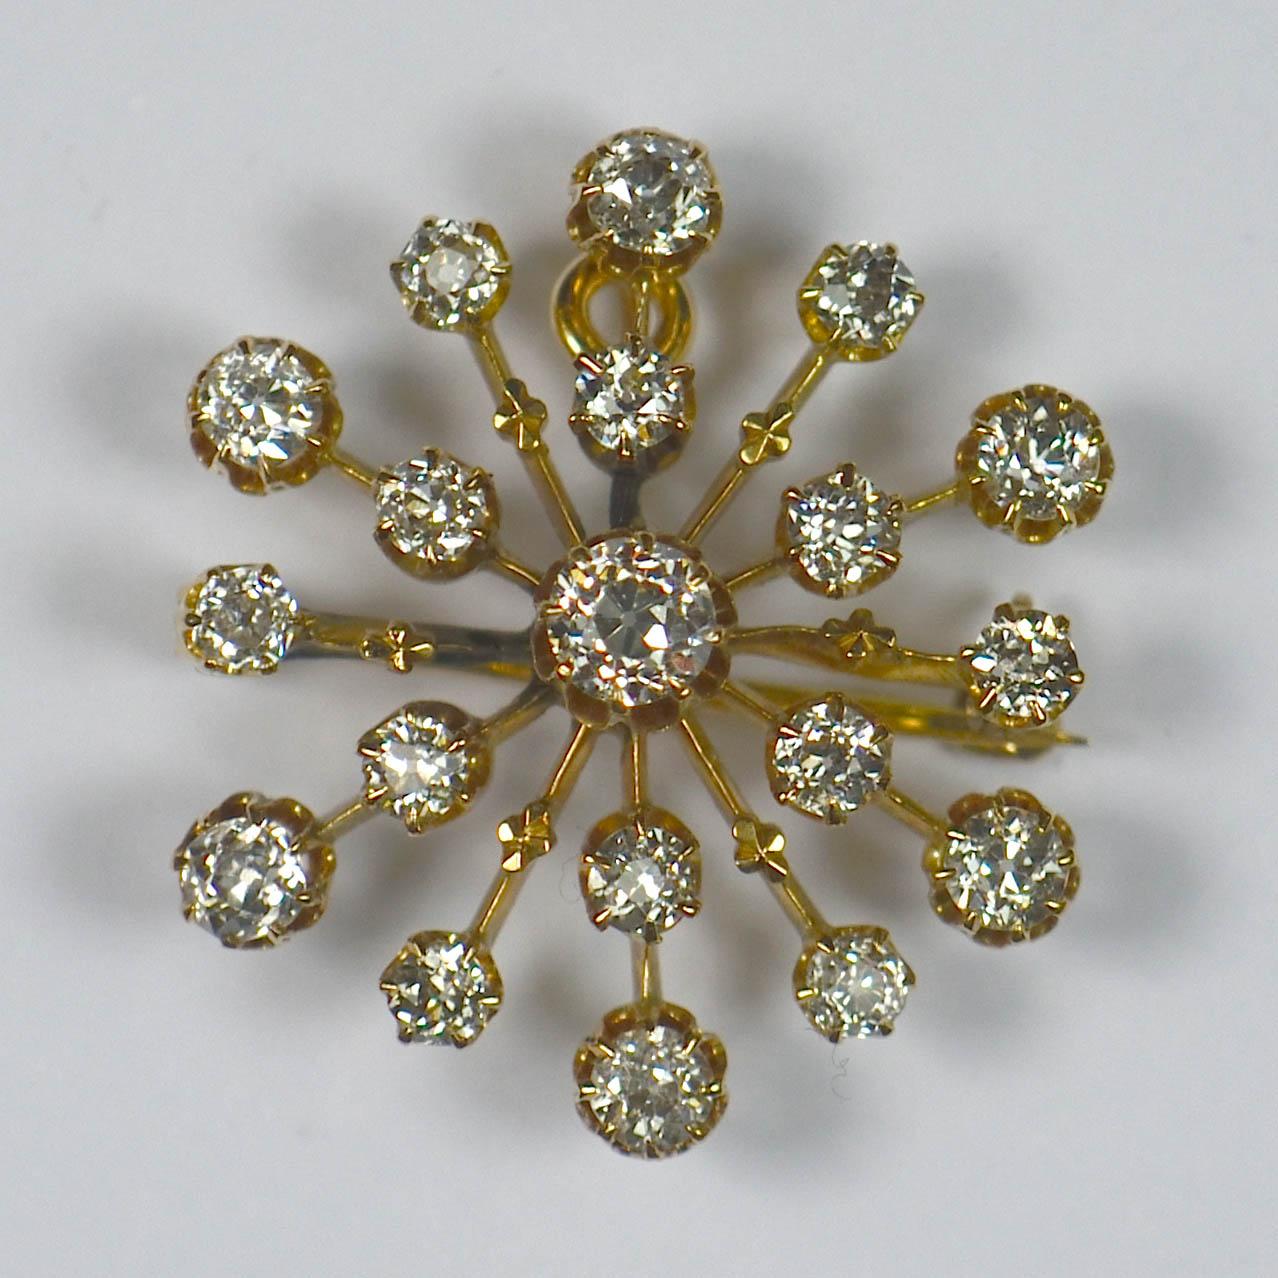 A simple but stylish 18 karat gold pendant lavishly sprinkled with diamonds in a snowflake design by the American firm Bailey, Banks & Biddle, circa 1890.  May also be worn as a brooch.

Set with 19 old cut diamonds with a total estimated weight of